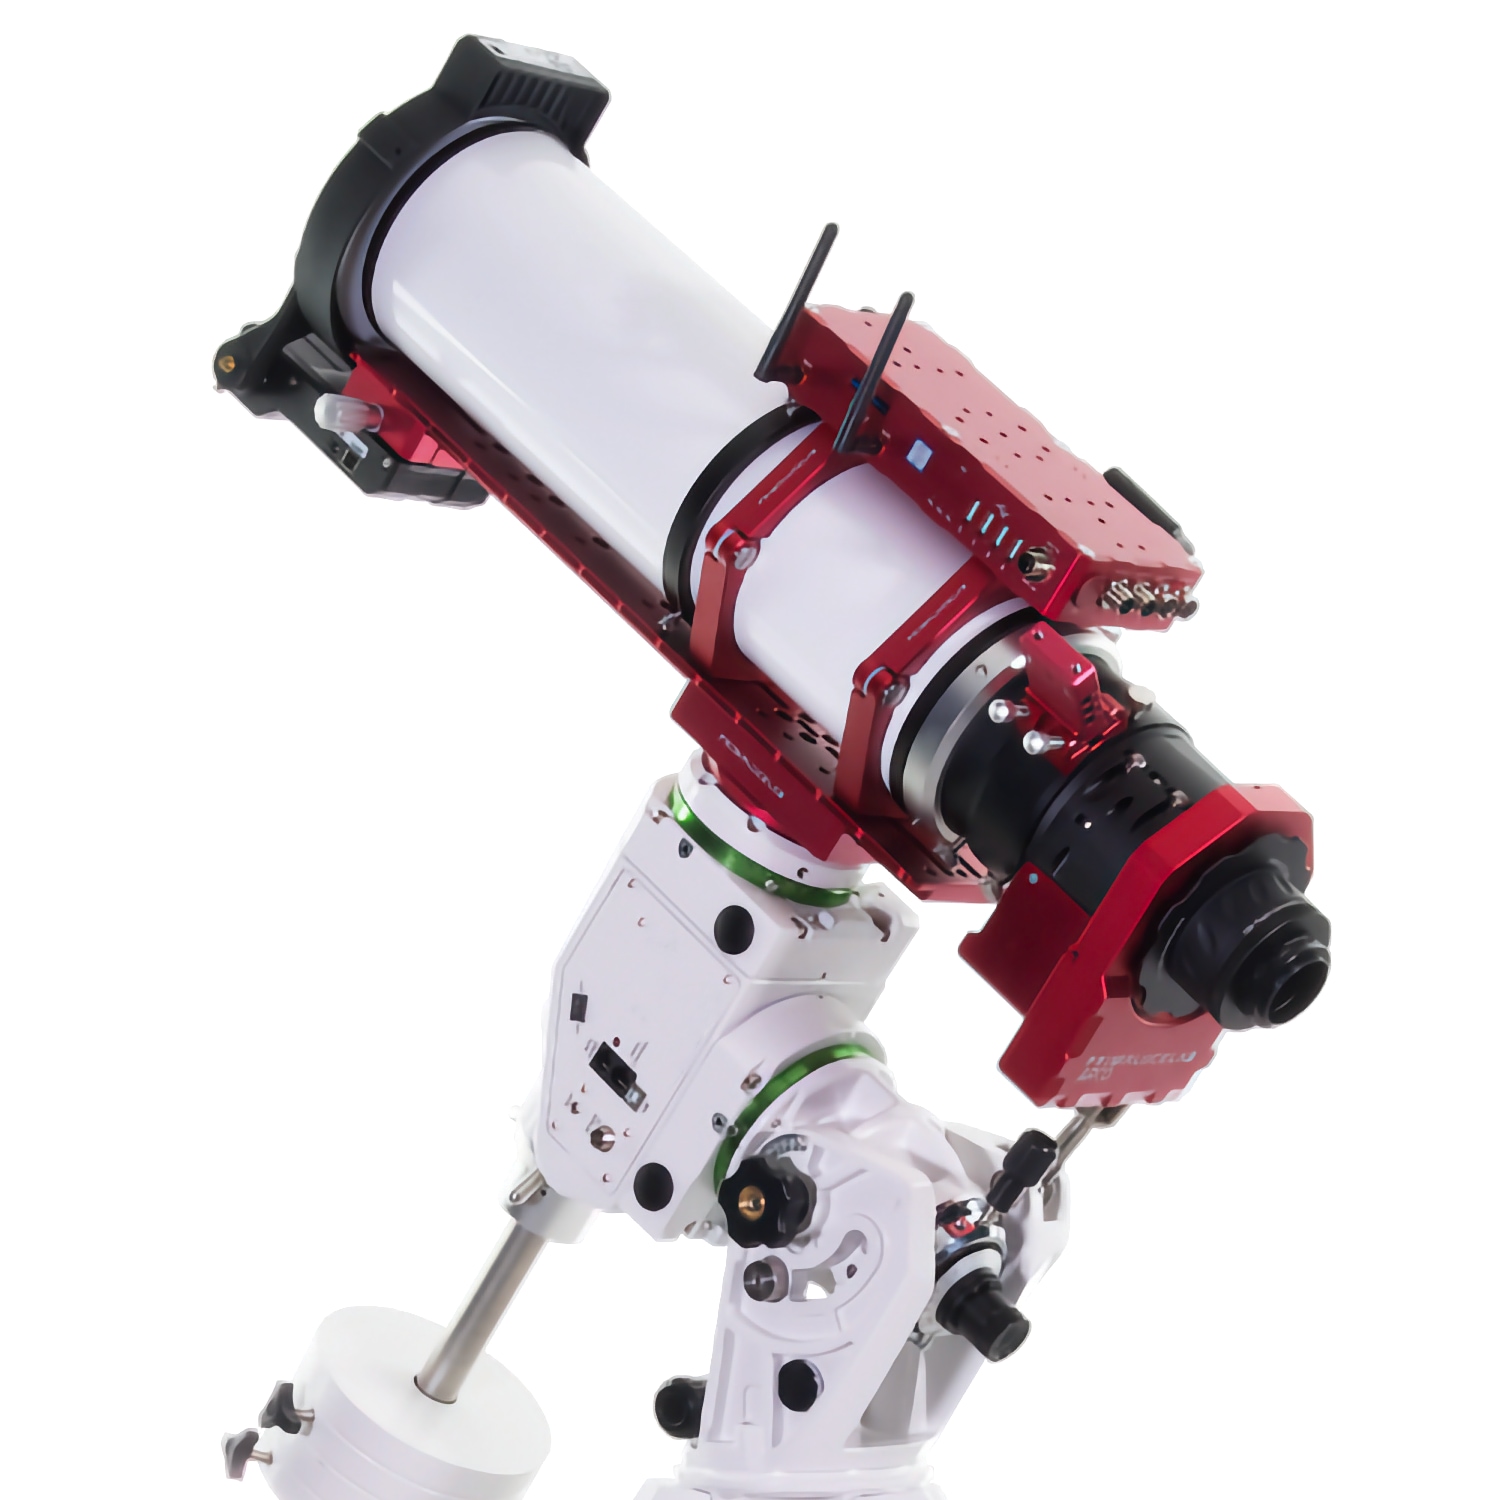 How to use SkyWatcher ESPRIT 100 ED for astrophotography